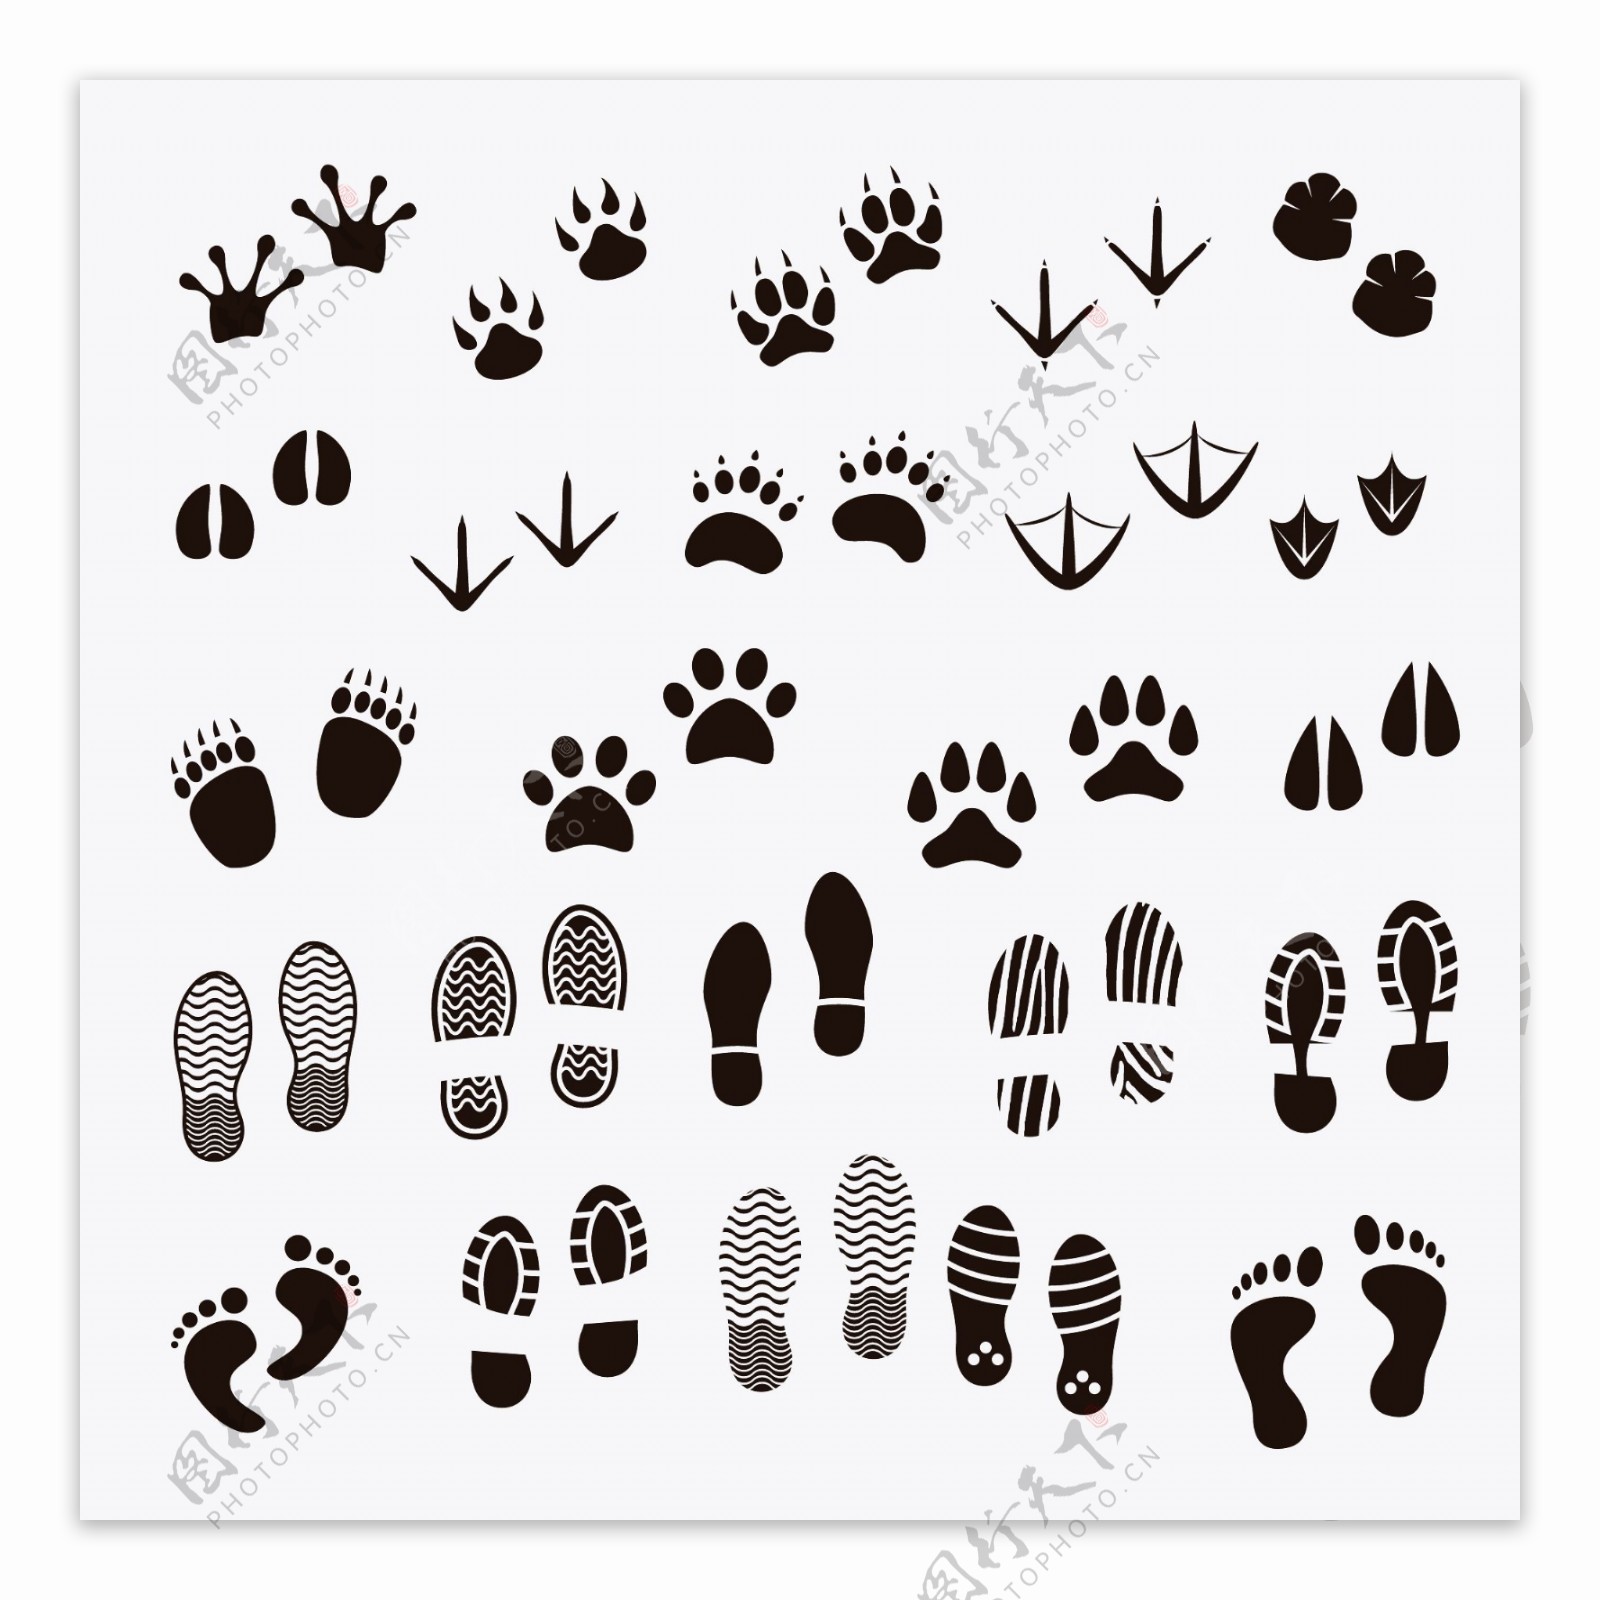 Footprint clipart animal, Footprint animal Transparent FREE for download on WebStockReview 2023